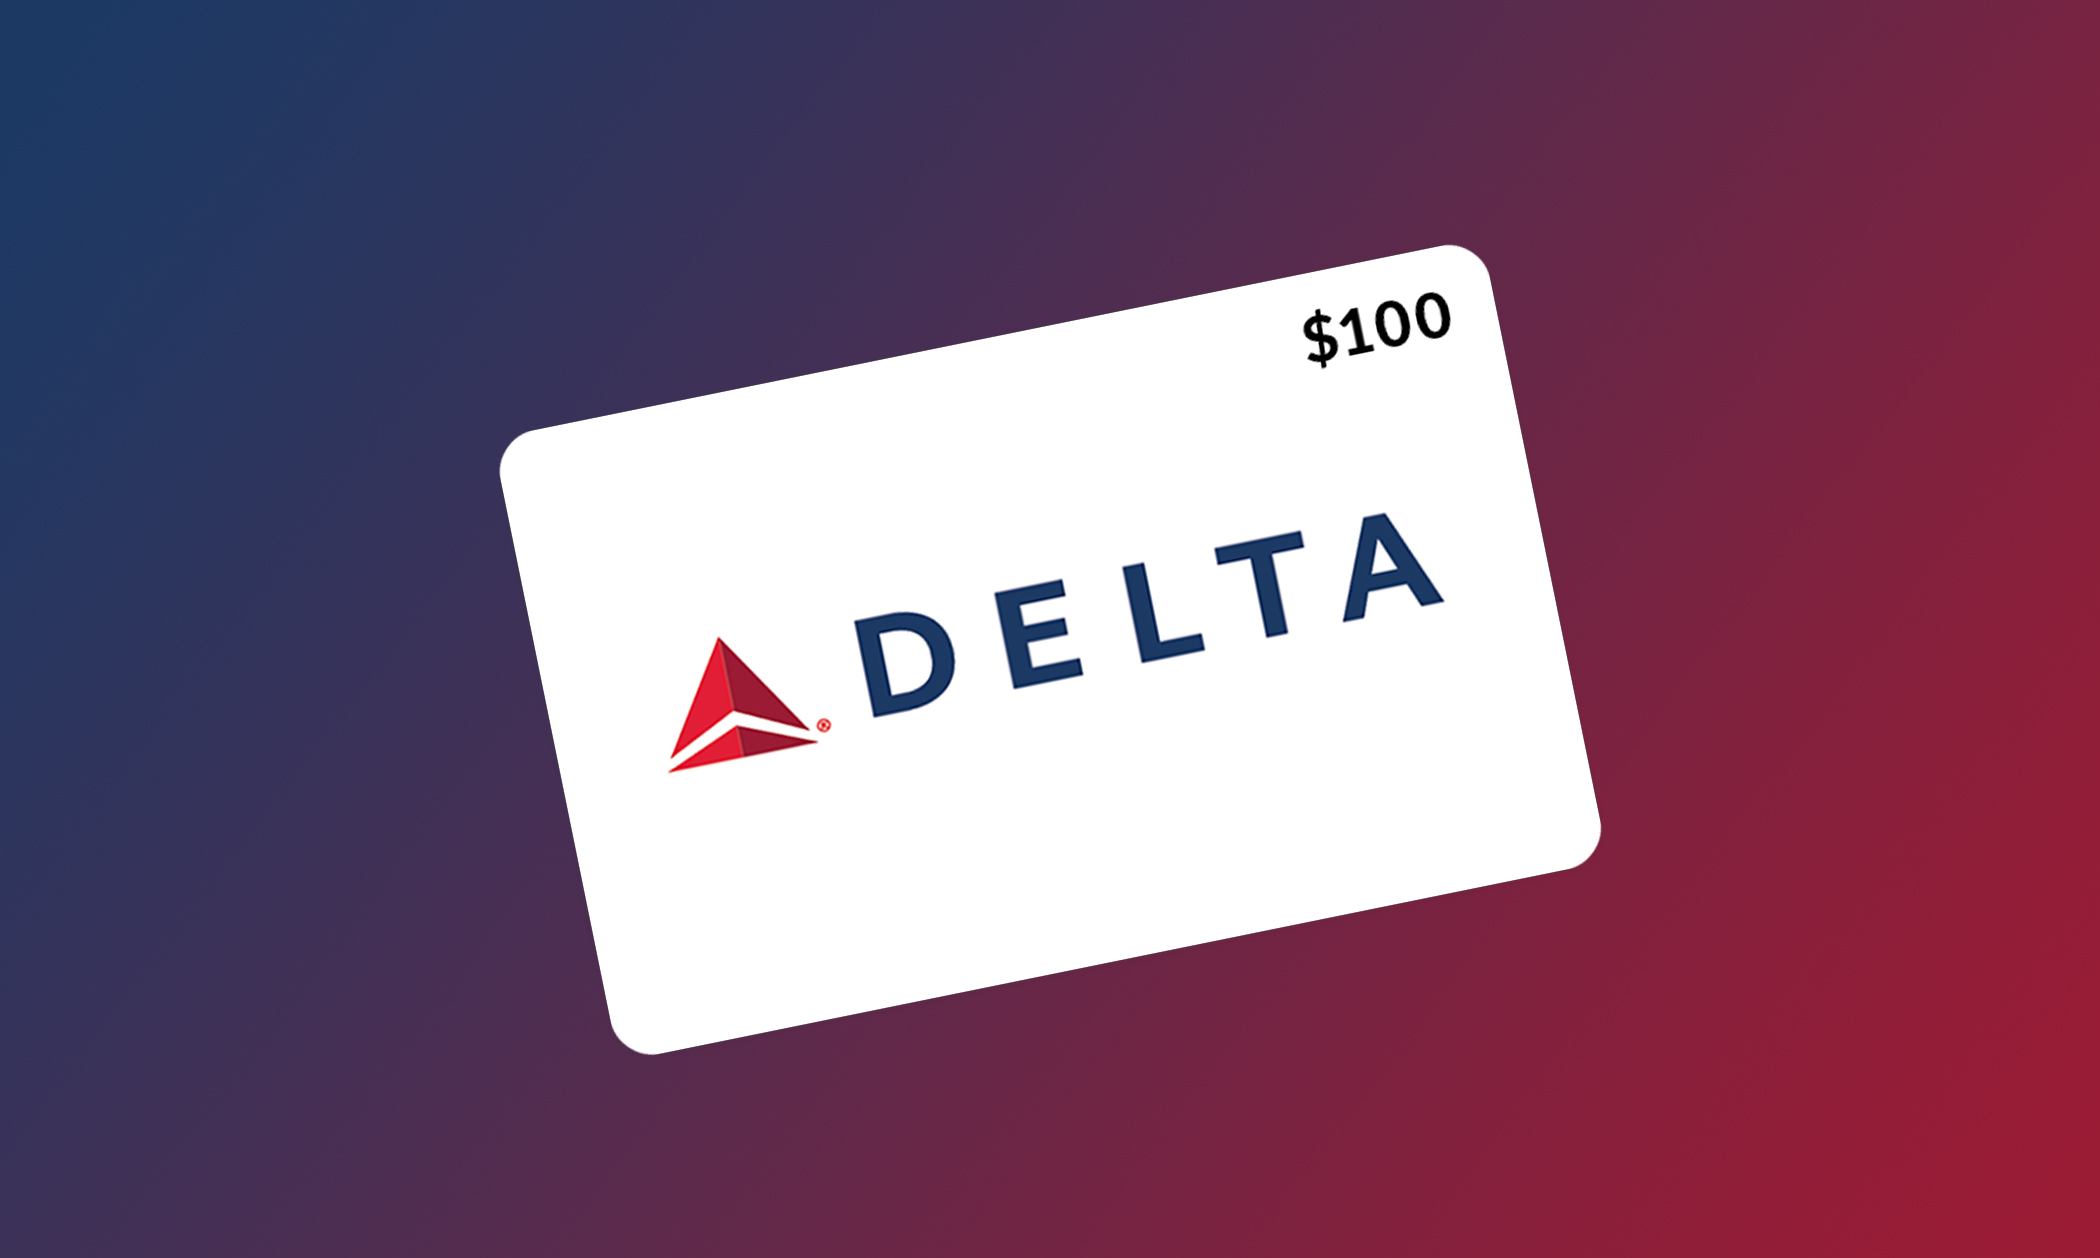 enter-to-win-a-100-delta-gift-card-okwow-sweepstakes-and-giveaways